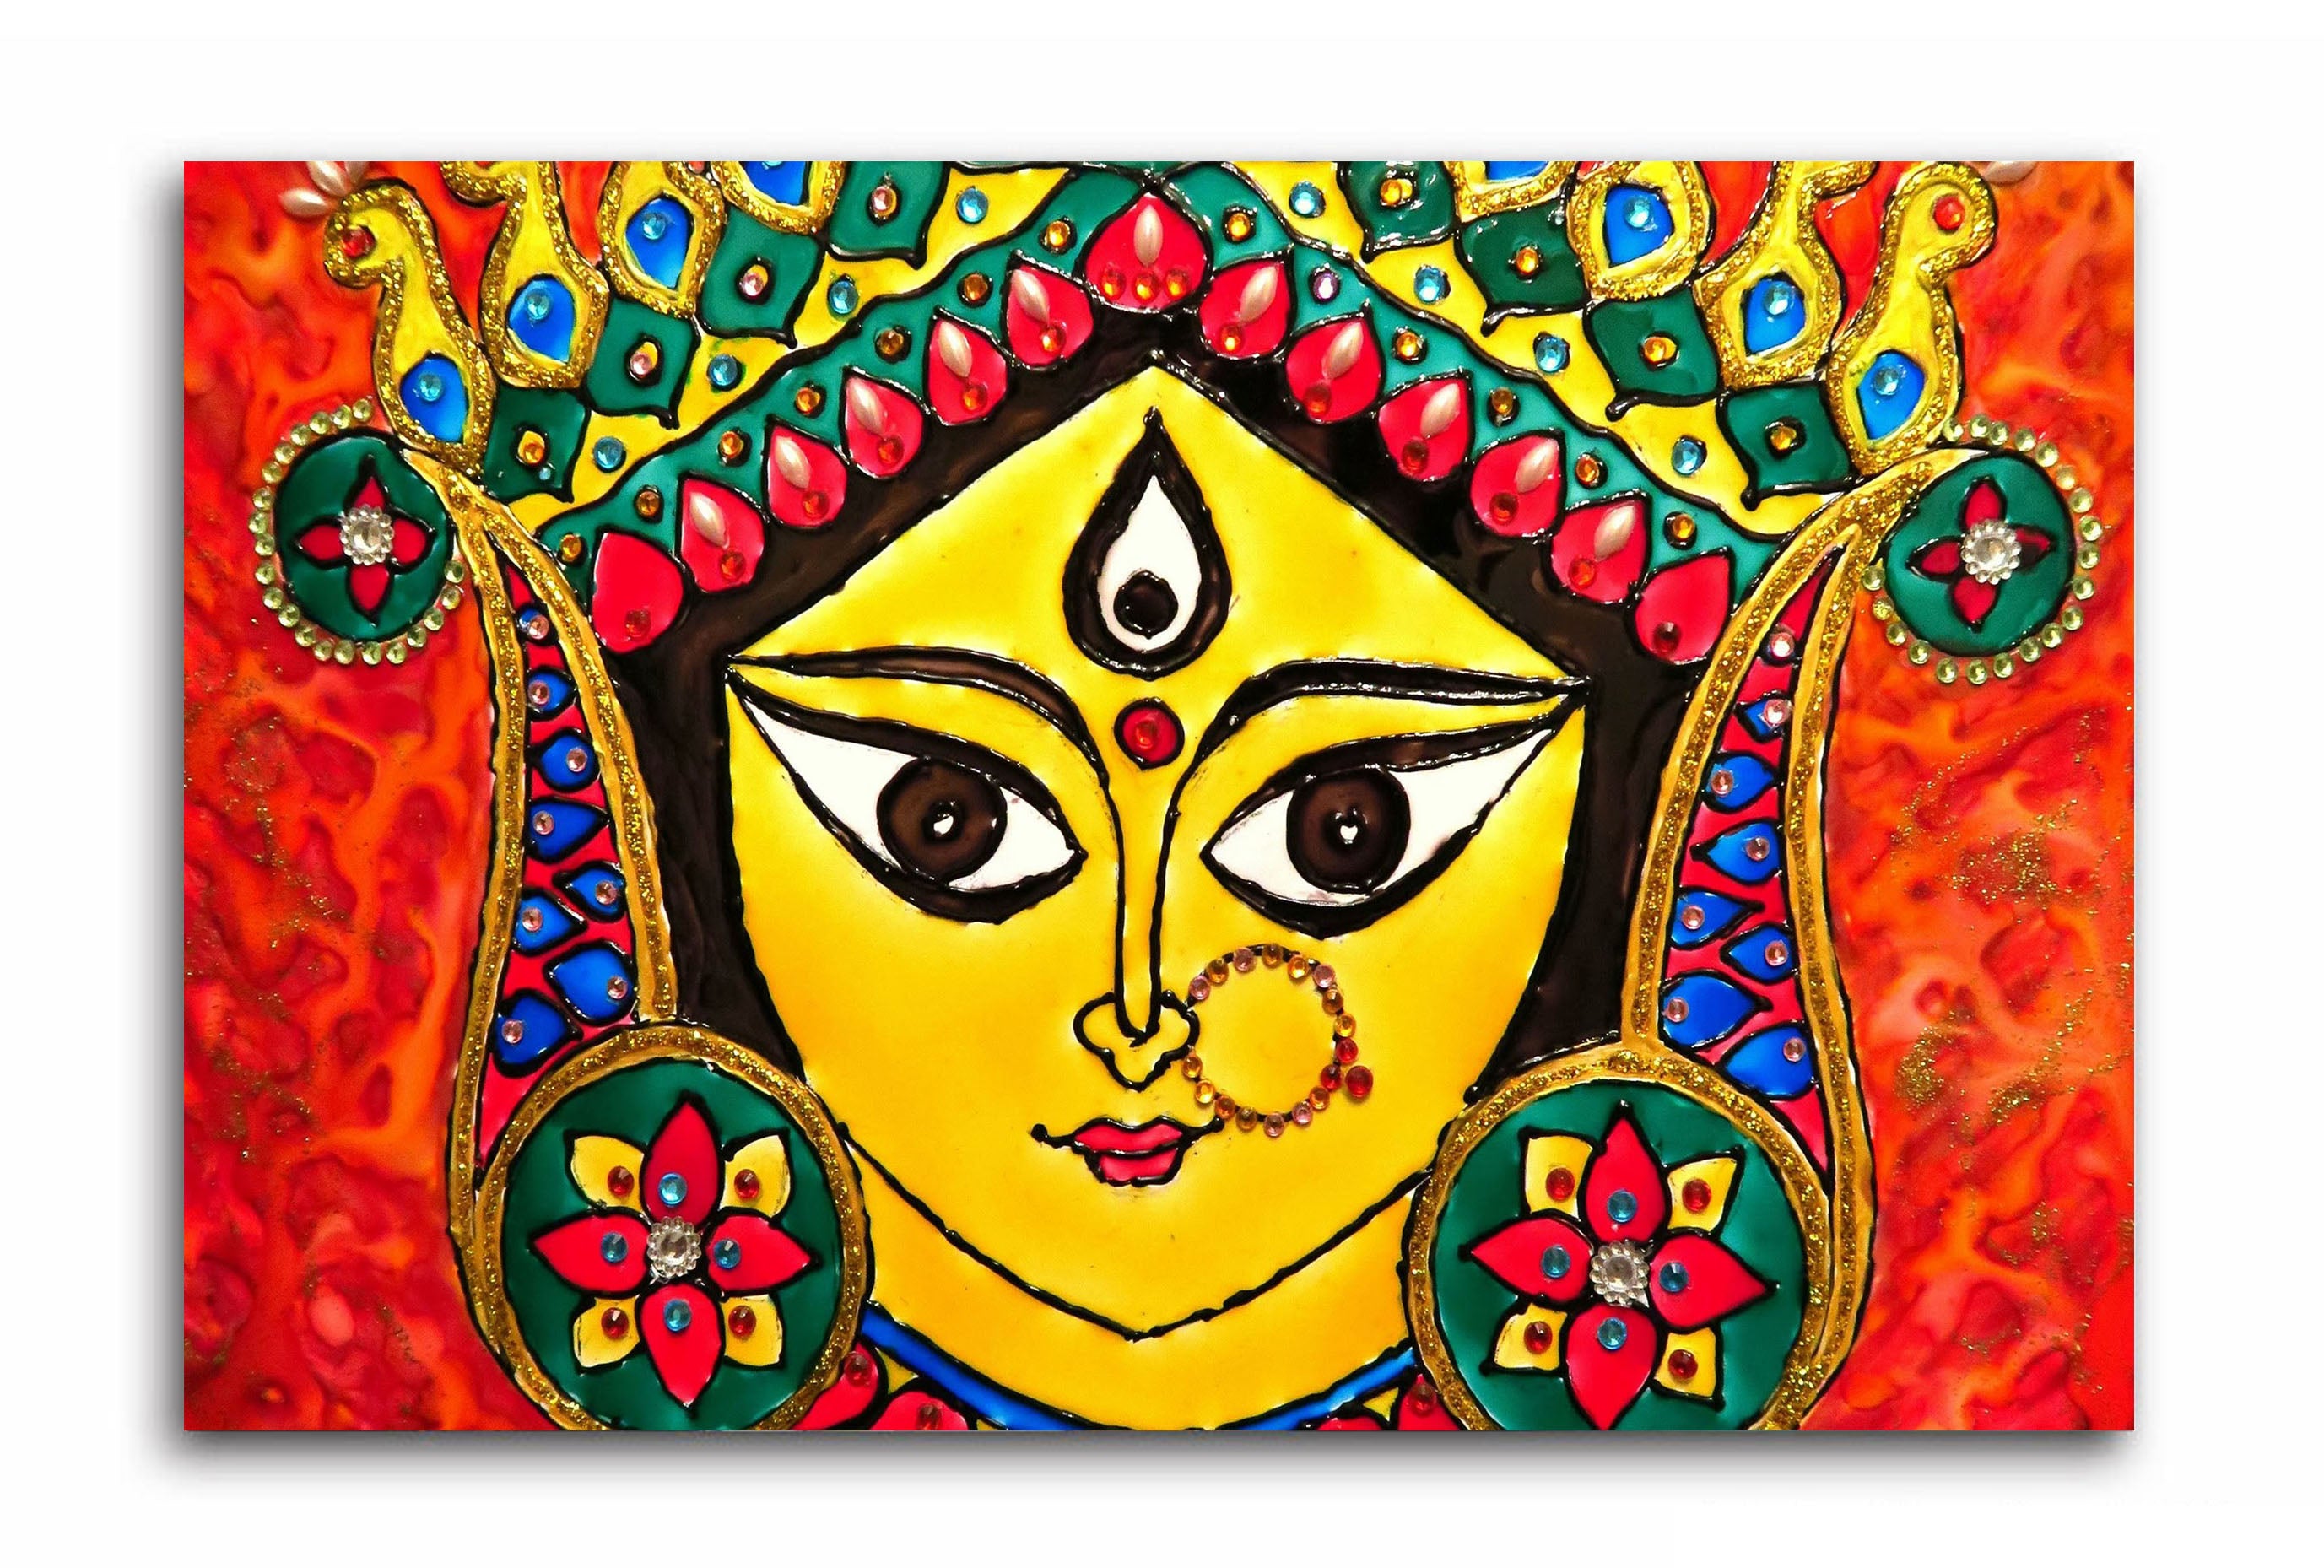 KARTIK Digital Print Maa Durga 5 Panel Wall Decor Wall Art Wooden Painting  Wallpapers for Home, Office & Gift(30 x 17.5 Inches) : Amazon.in: Home &  Kitchen